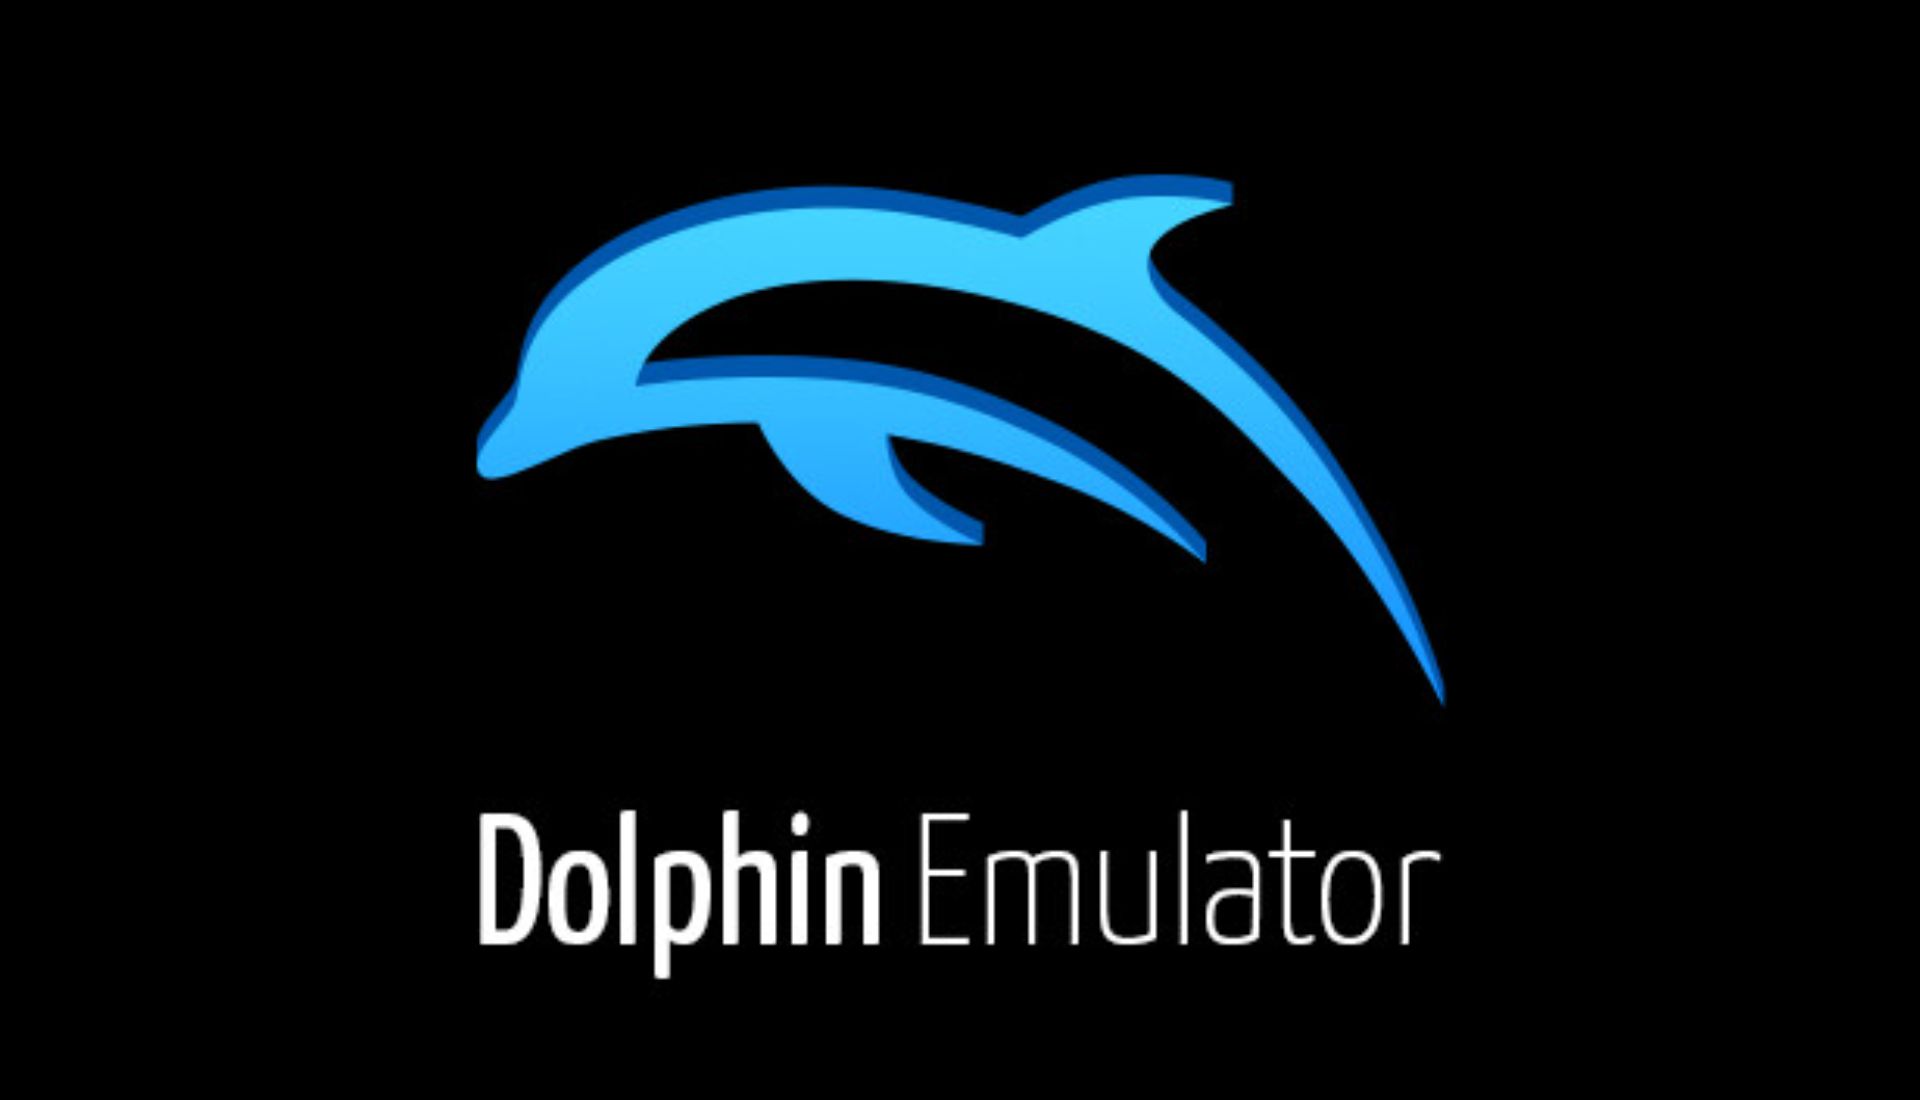 Dolphin Emulator No Longer Coming To Steam After Nintendo DMCA Takedown